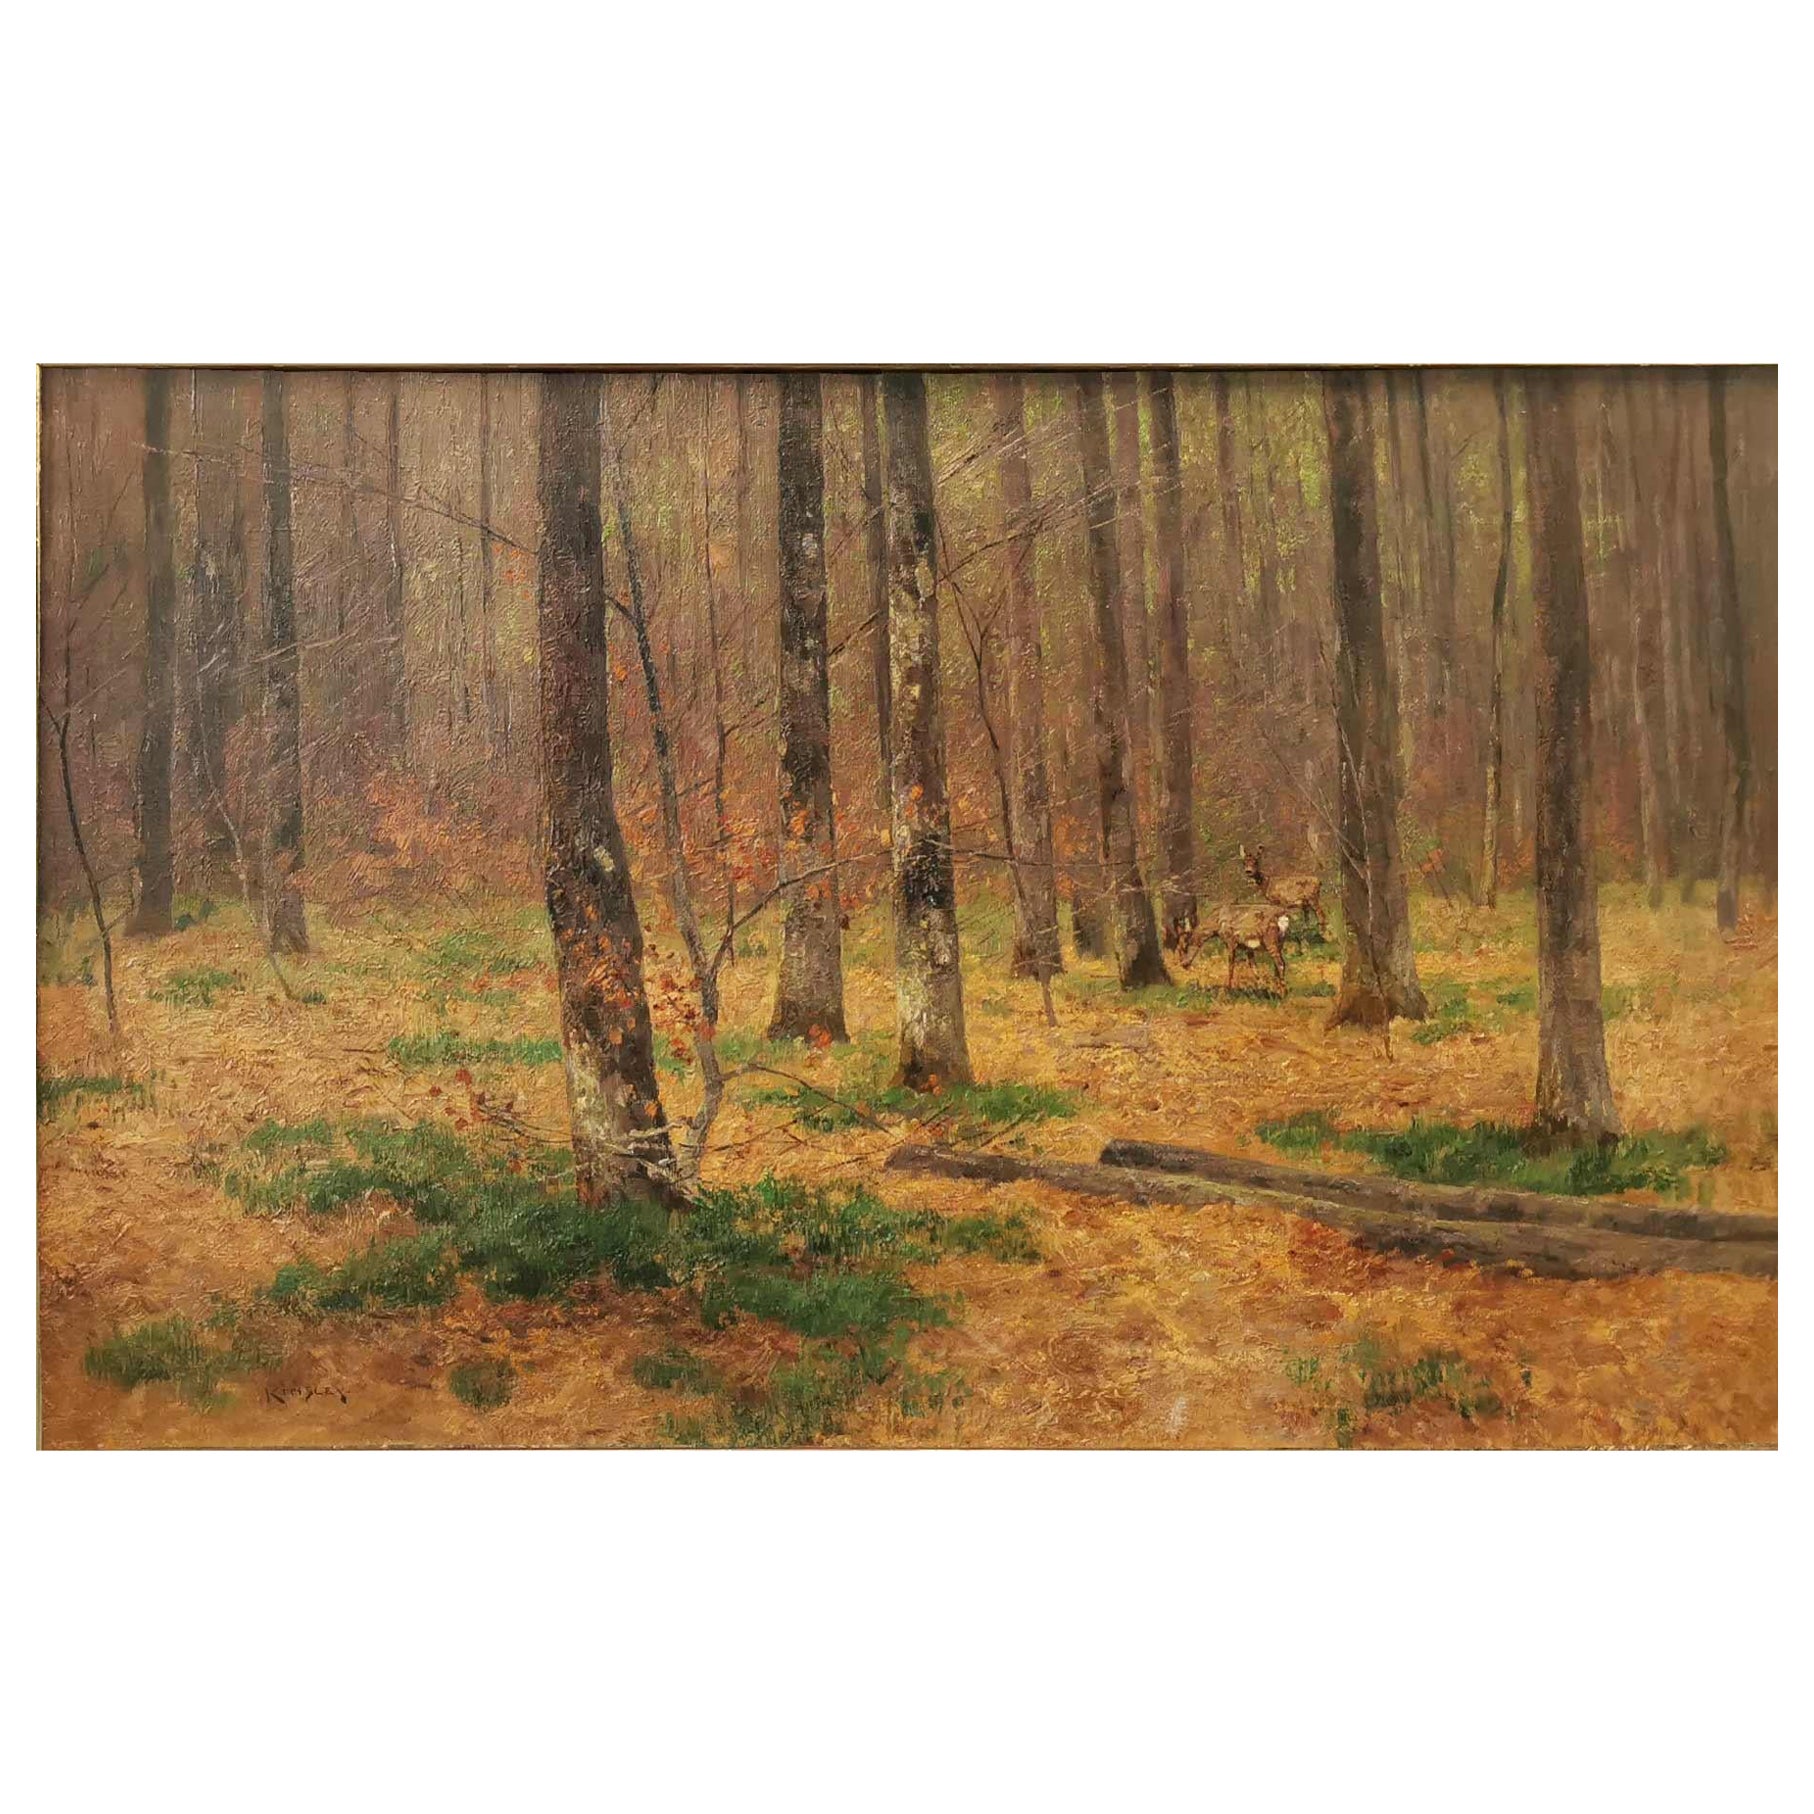 Roe Deer in the Woods Oil on Canvas Painting by Nelson Gray Kinsley